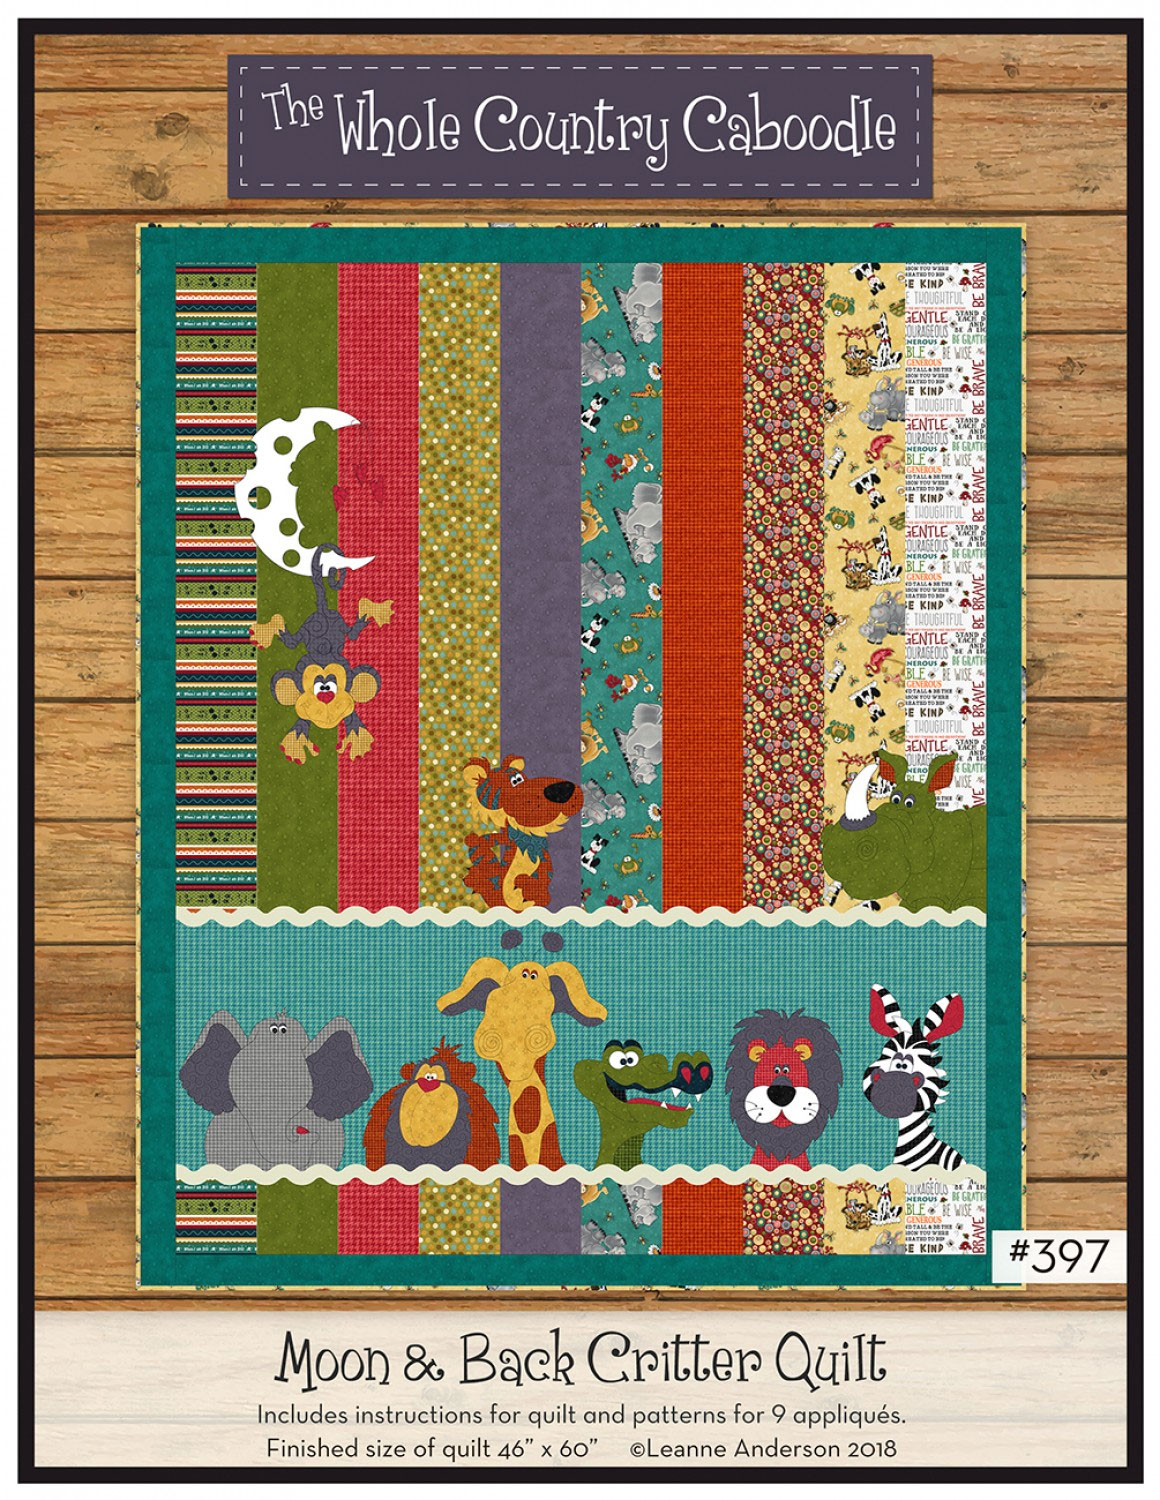 Moon-and-Back-Critter-quilt-sewing-pattern-The-Whole-Country-Caboodle-front